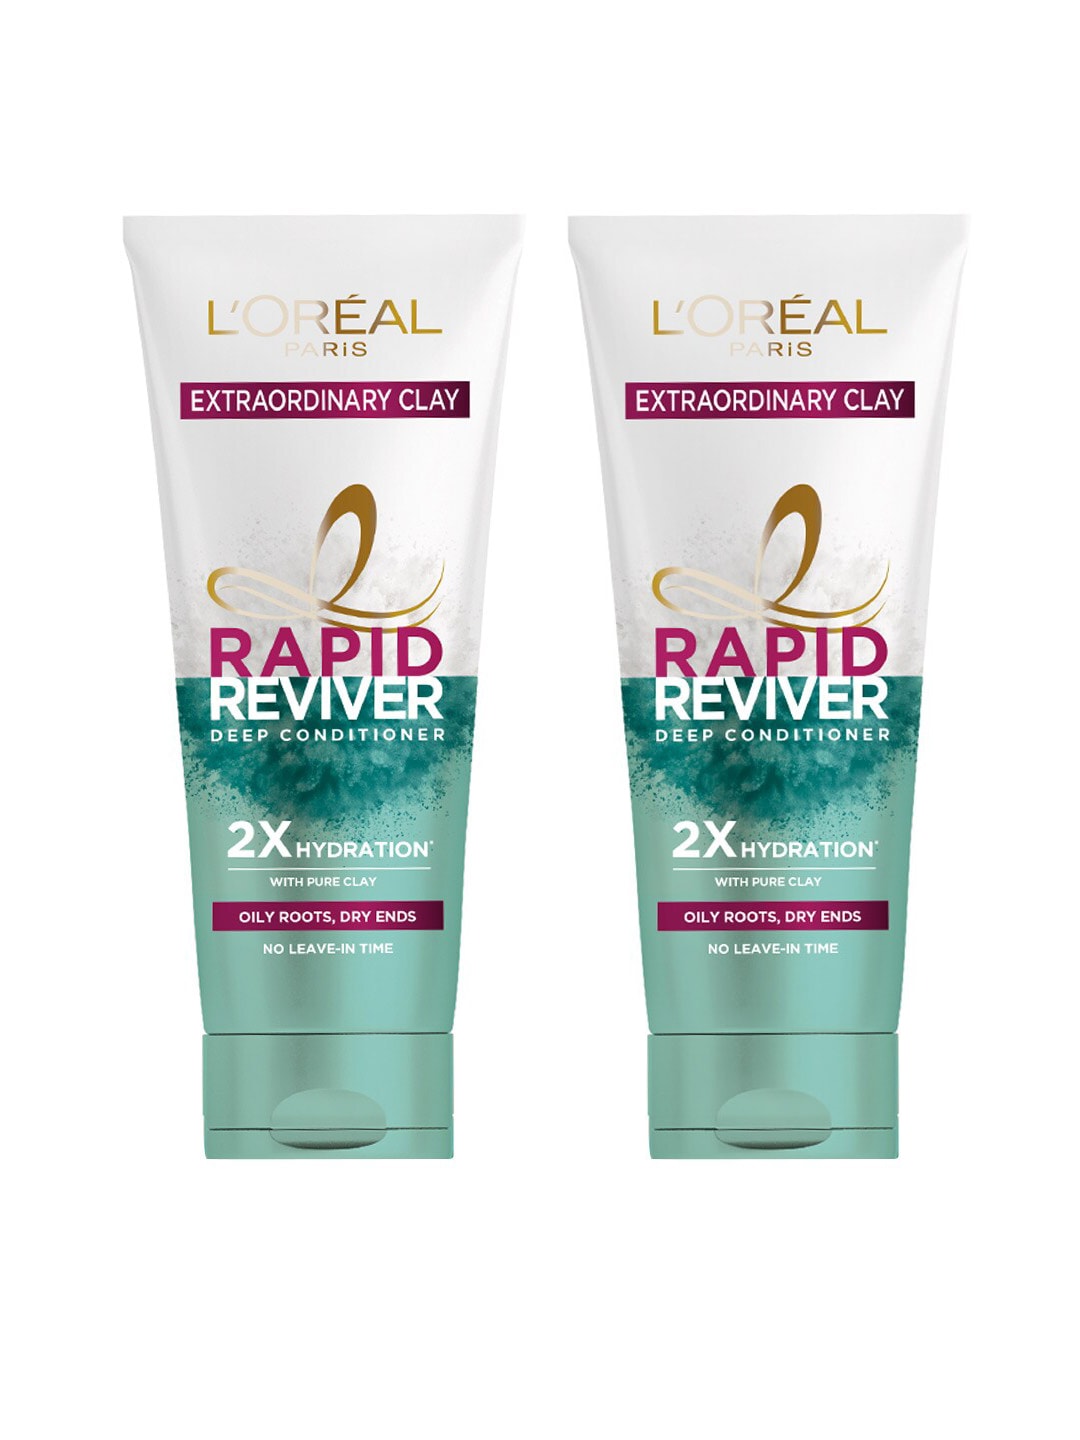 L'Oreal Paris Women Set Of 2 Rapid Reviver Extraordinary Clay Deep Conditioners Price in India